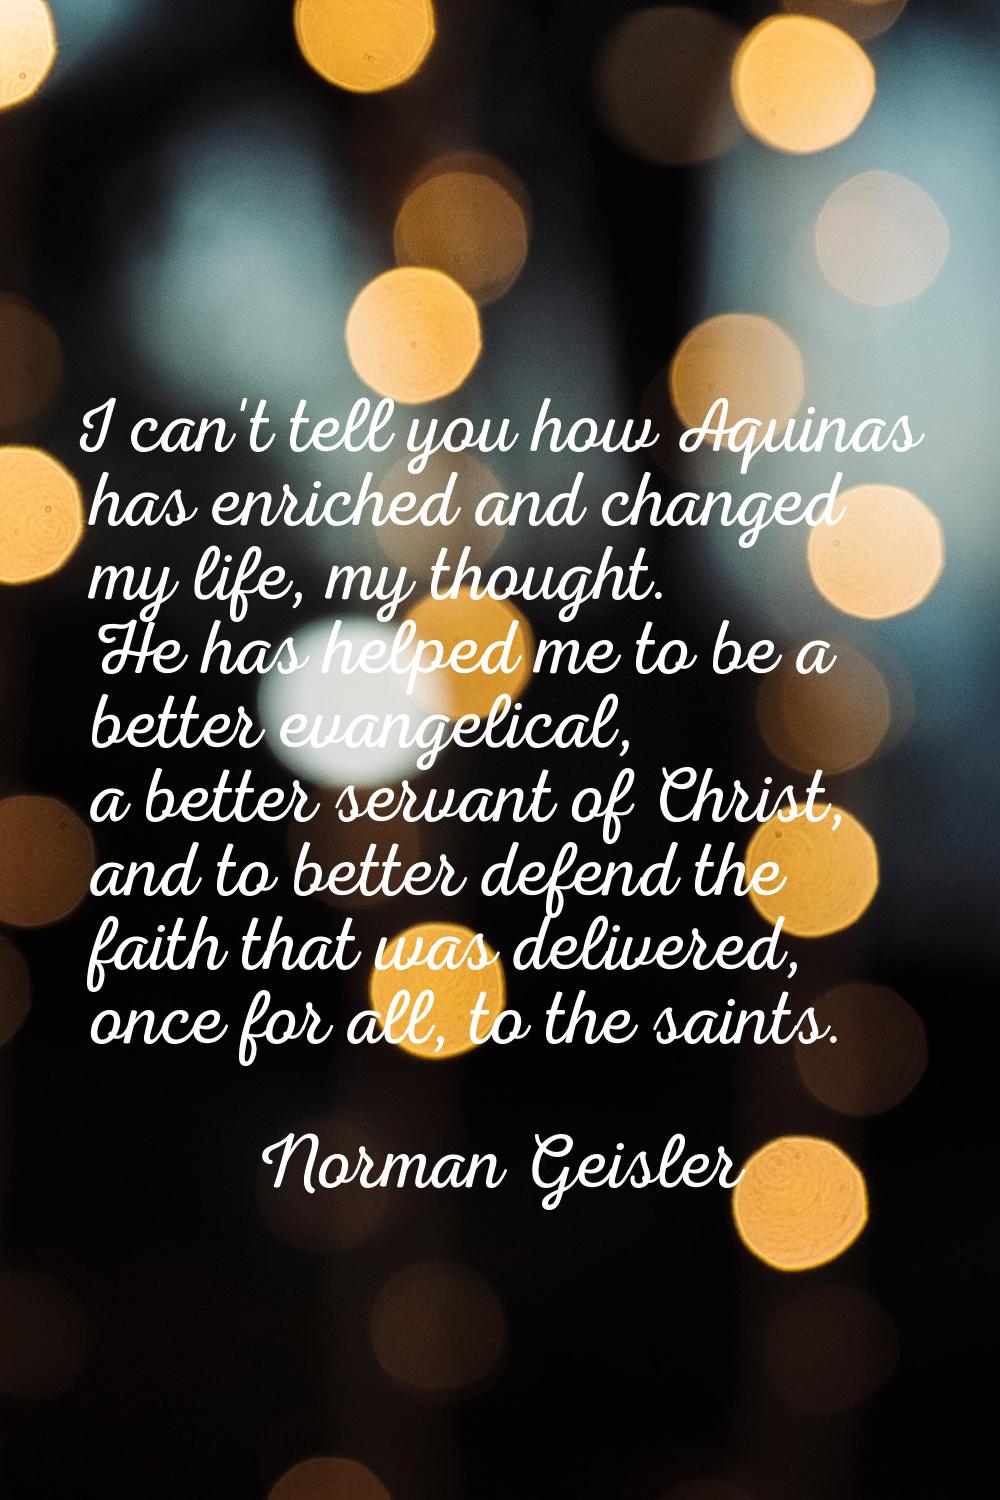 I can't tell you how Aquinas has enriched and changed my life, my thought. He has helped me to be a